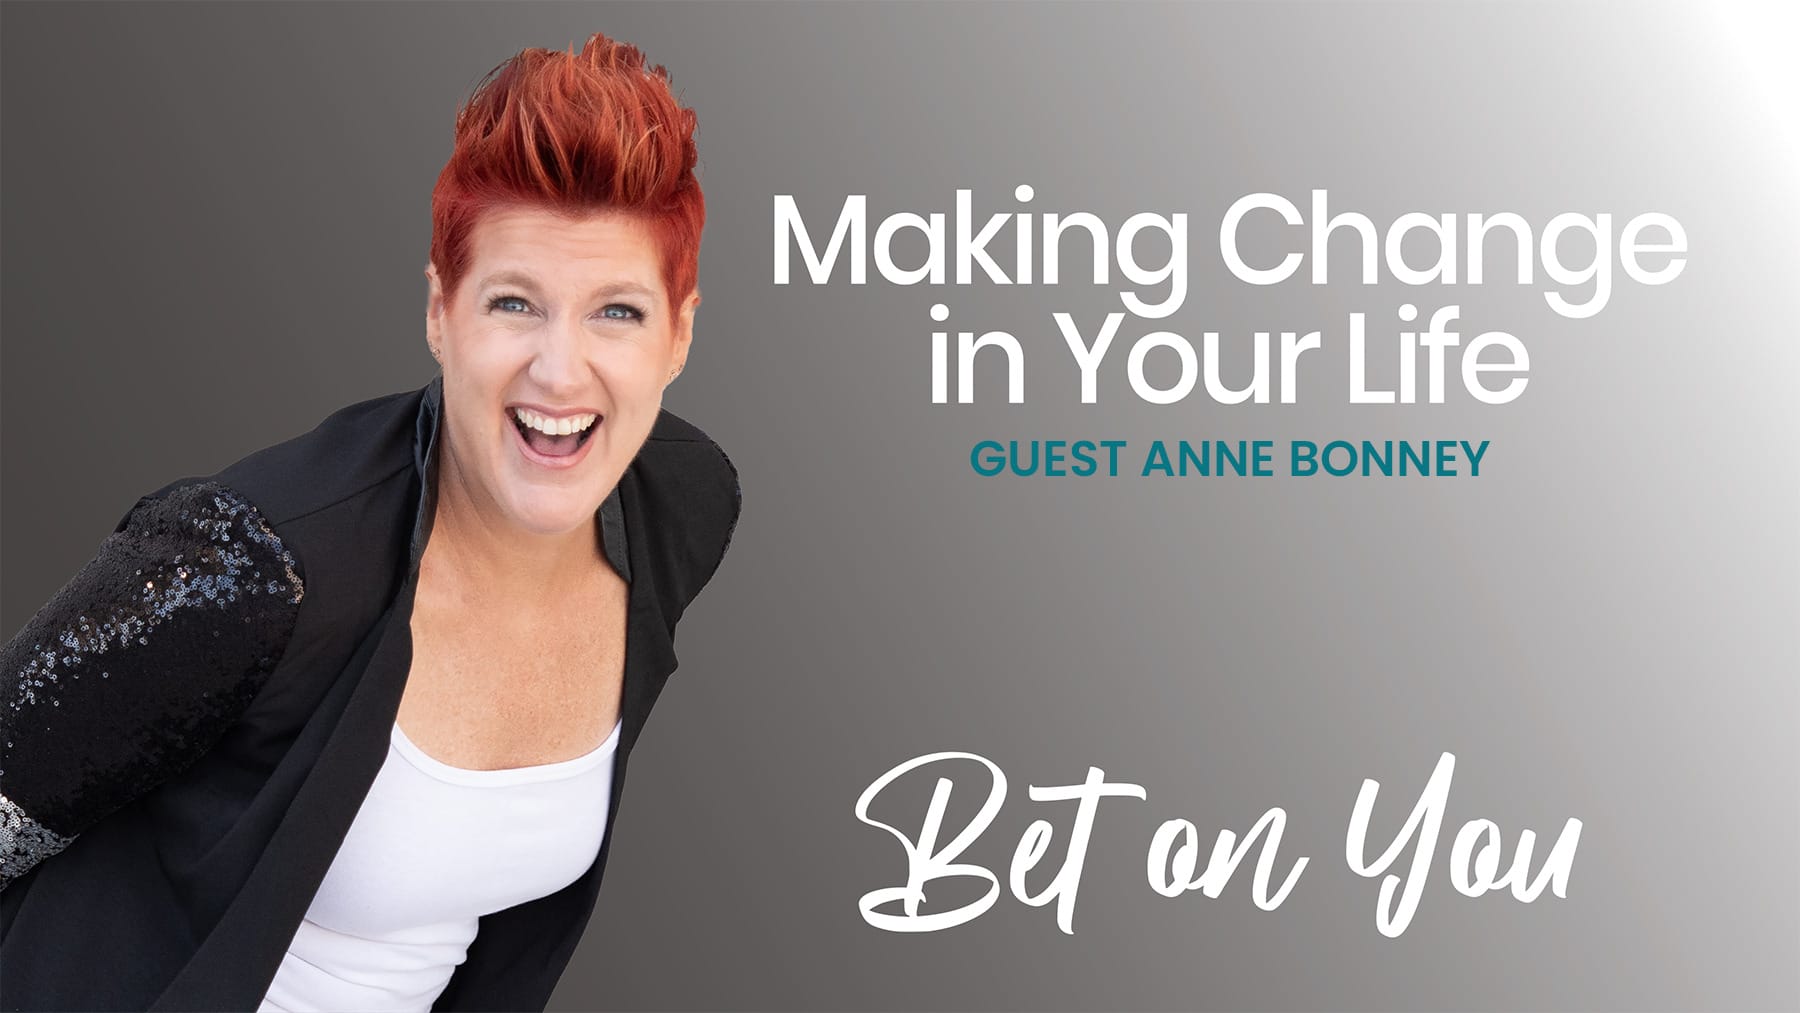 Bet on You Podcast with Guest Anne Bonney